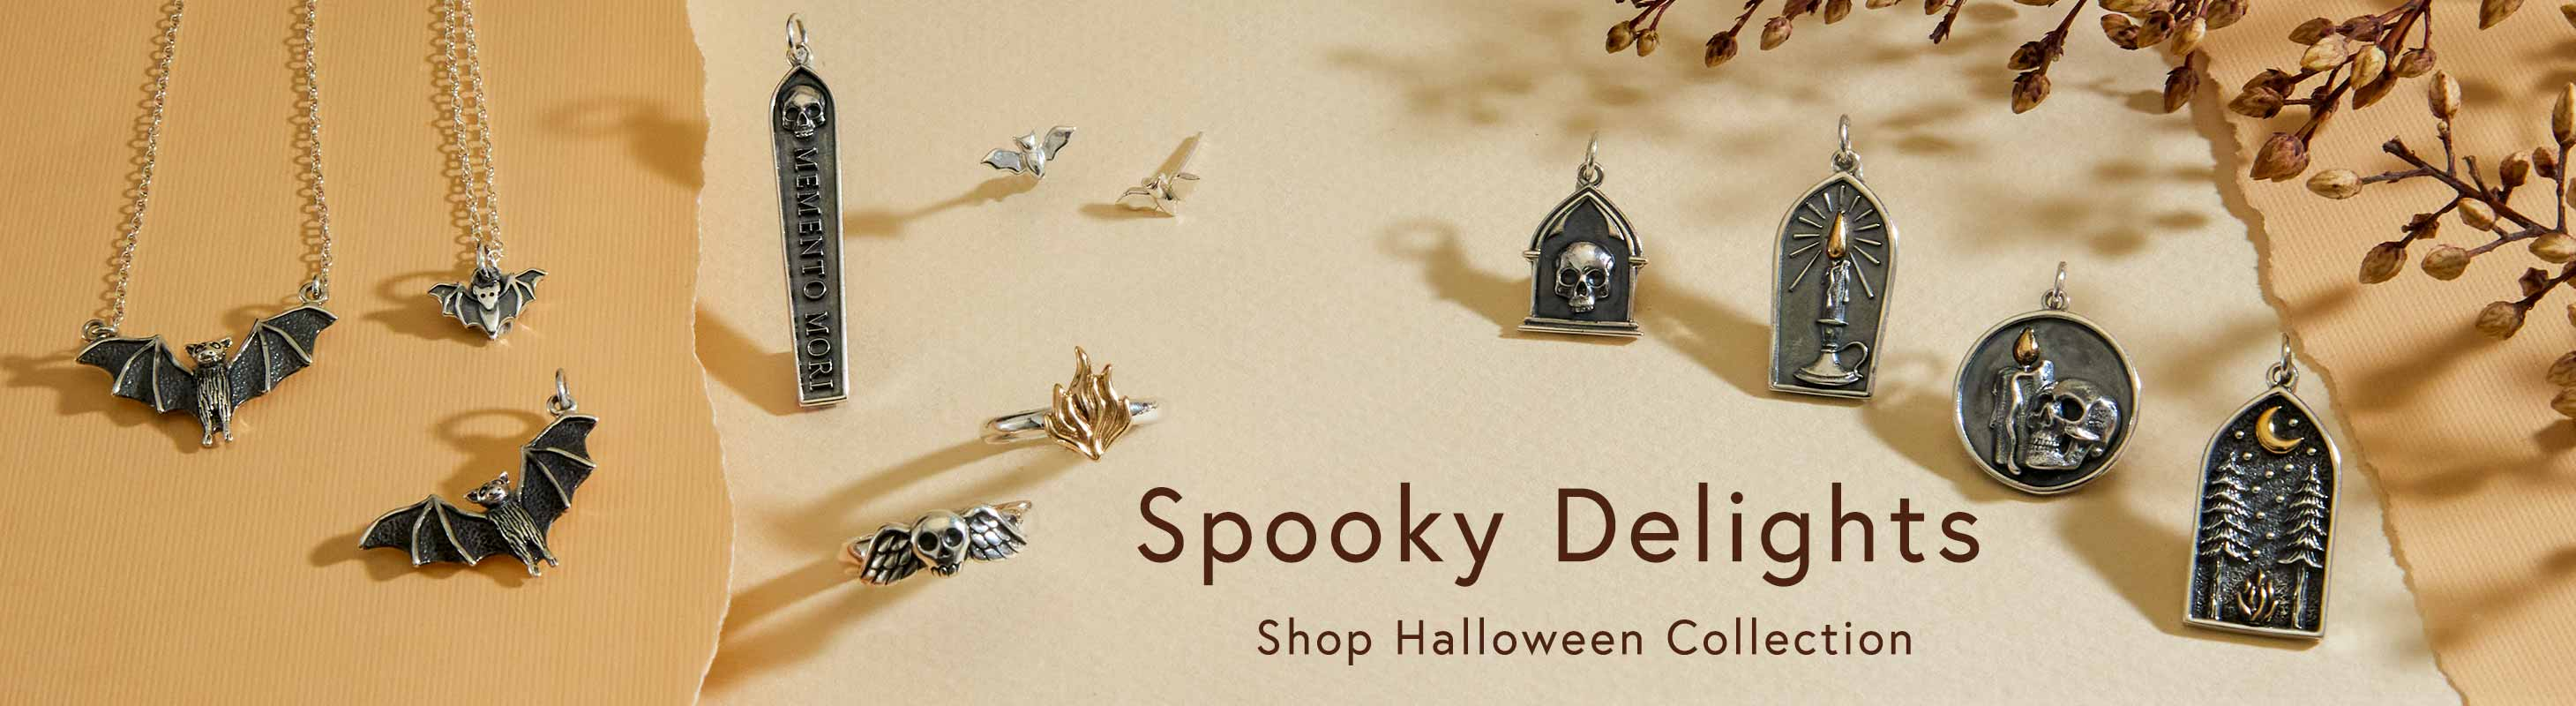 Shop these Spooky Delights in our Halloween Collection